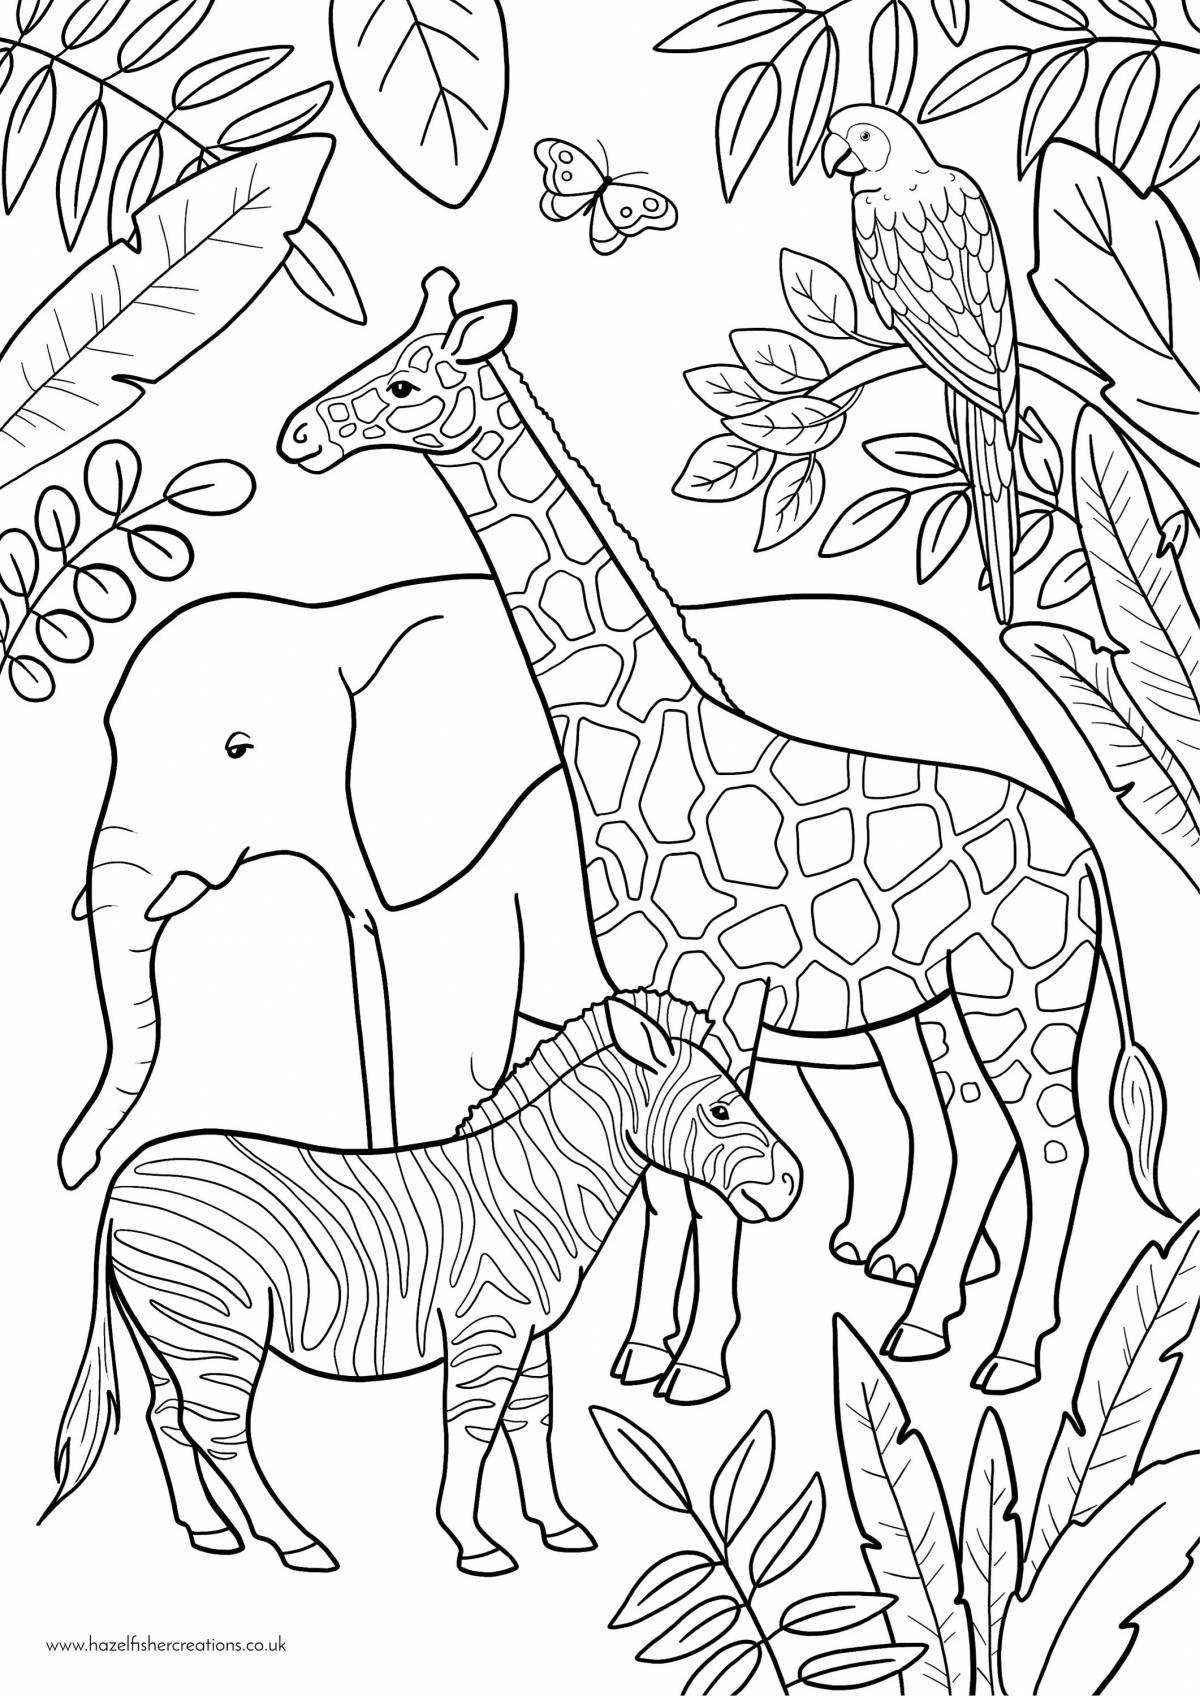 Realistic African Animals Coloring Page for 4-5 year olds